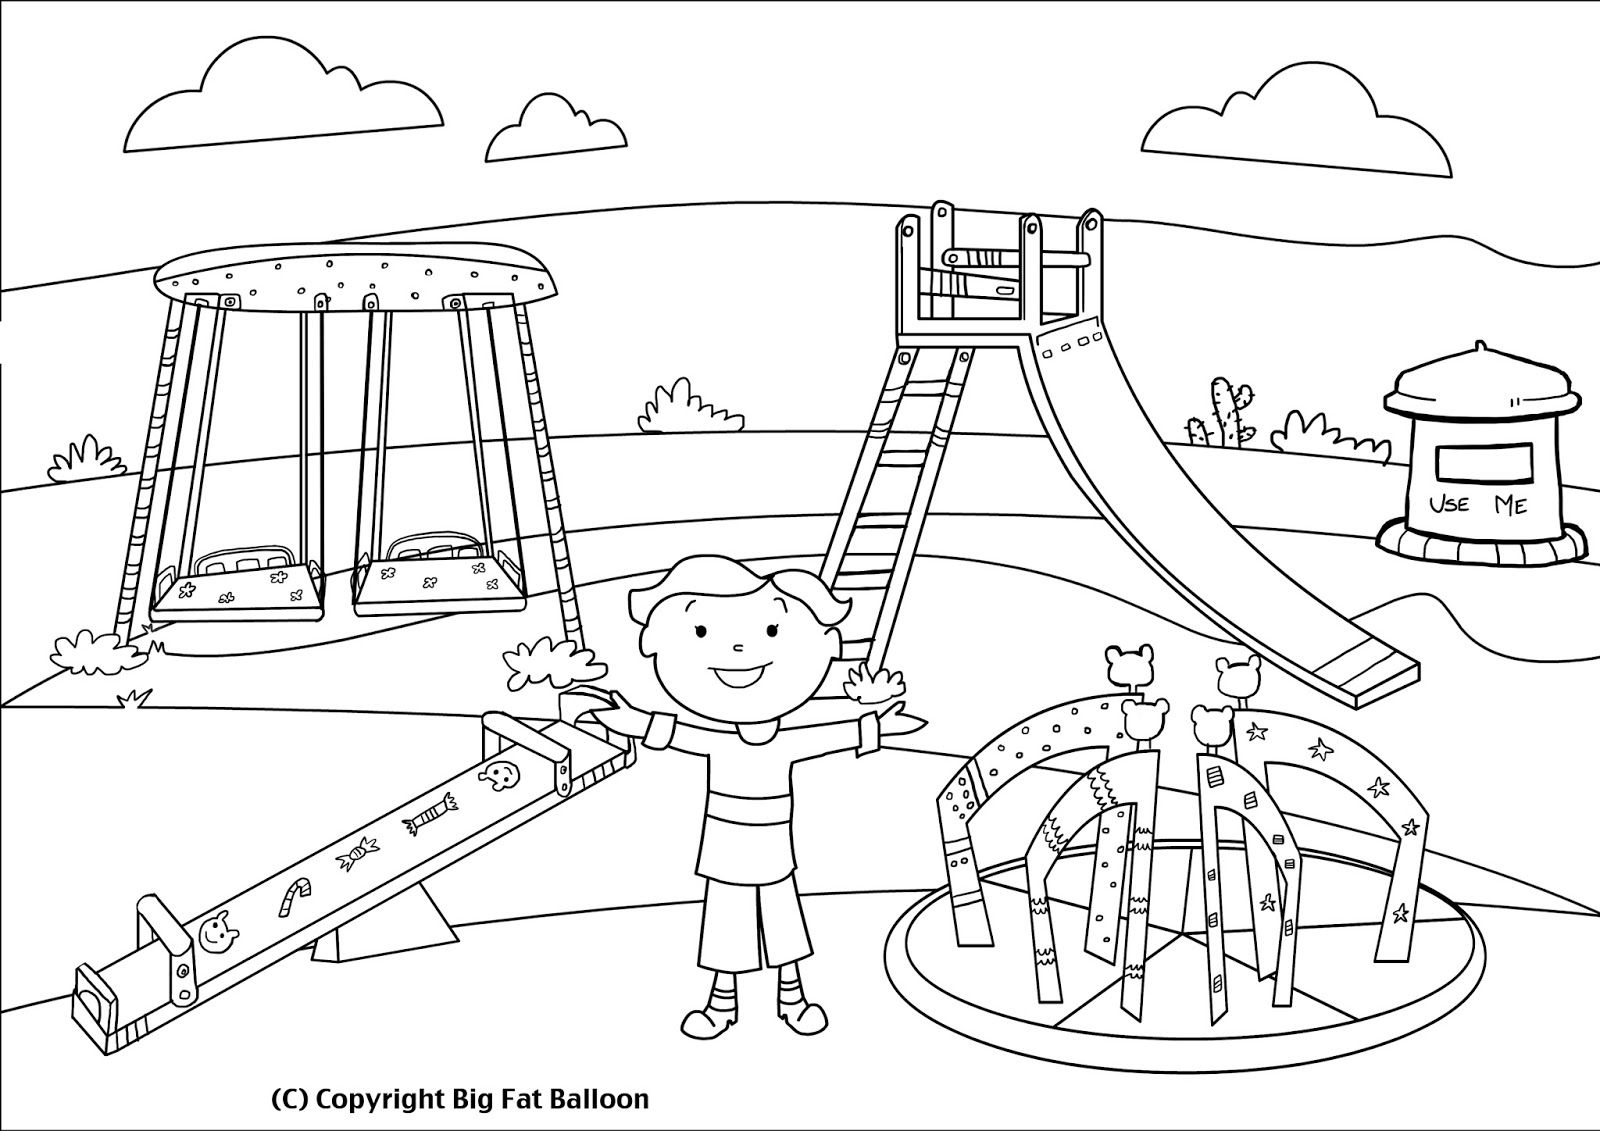 Kids on playground clipart black and white